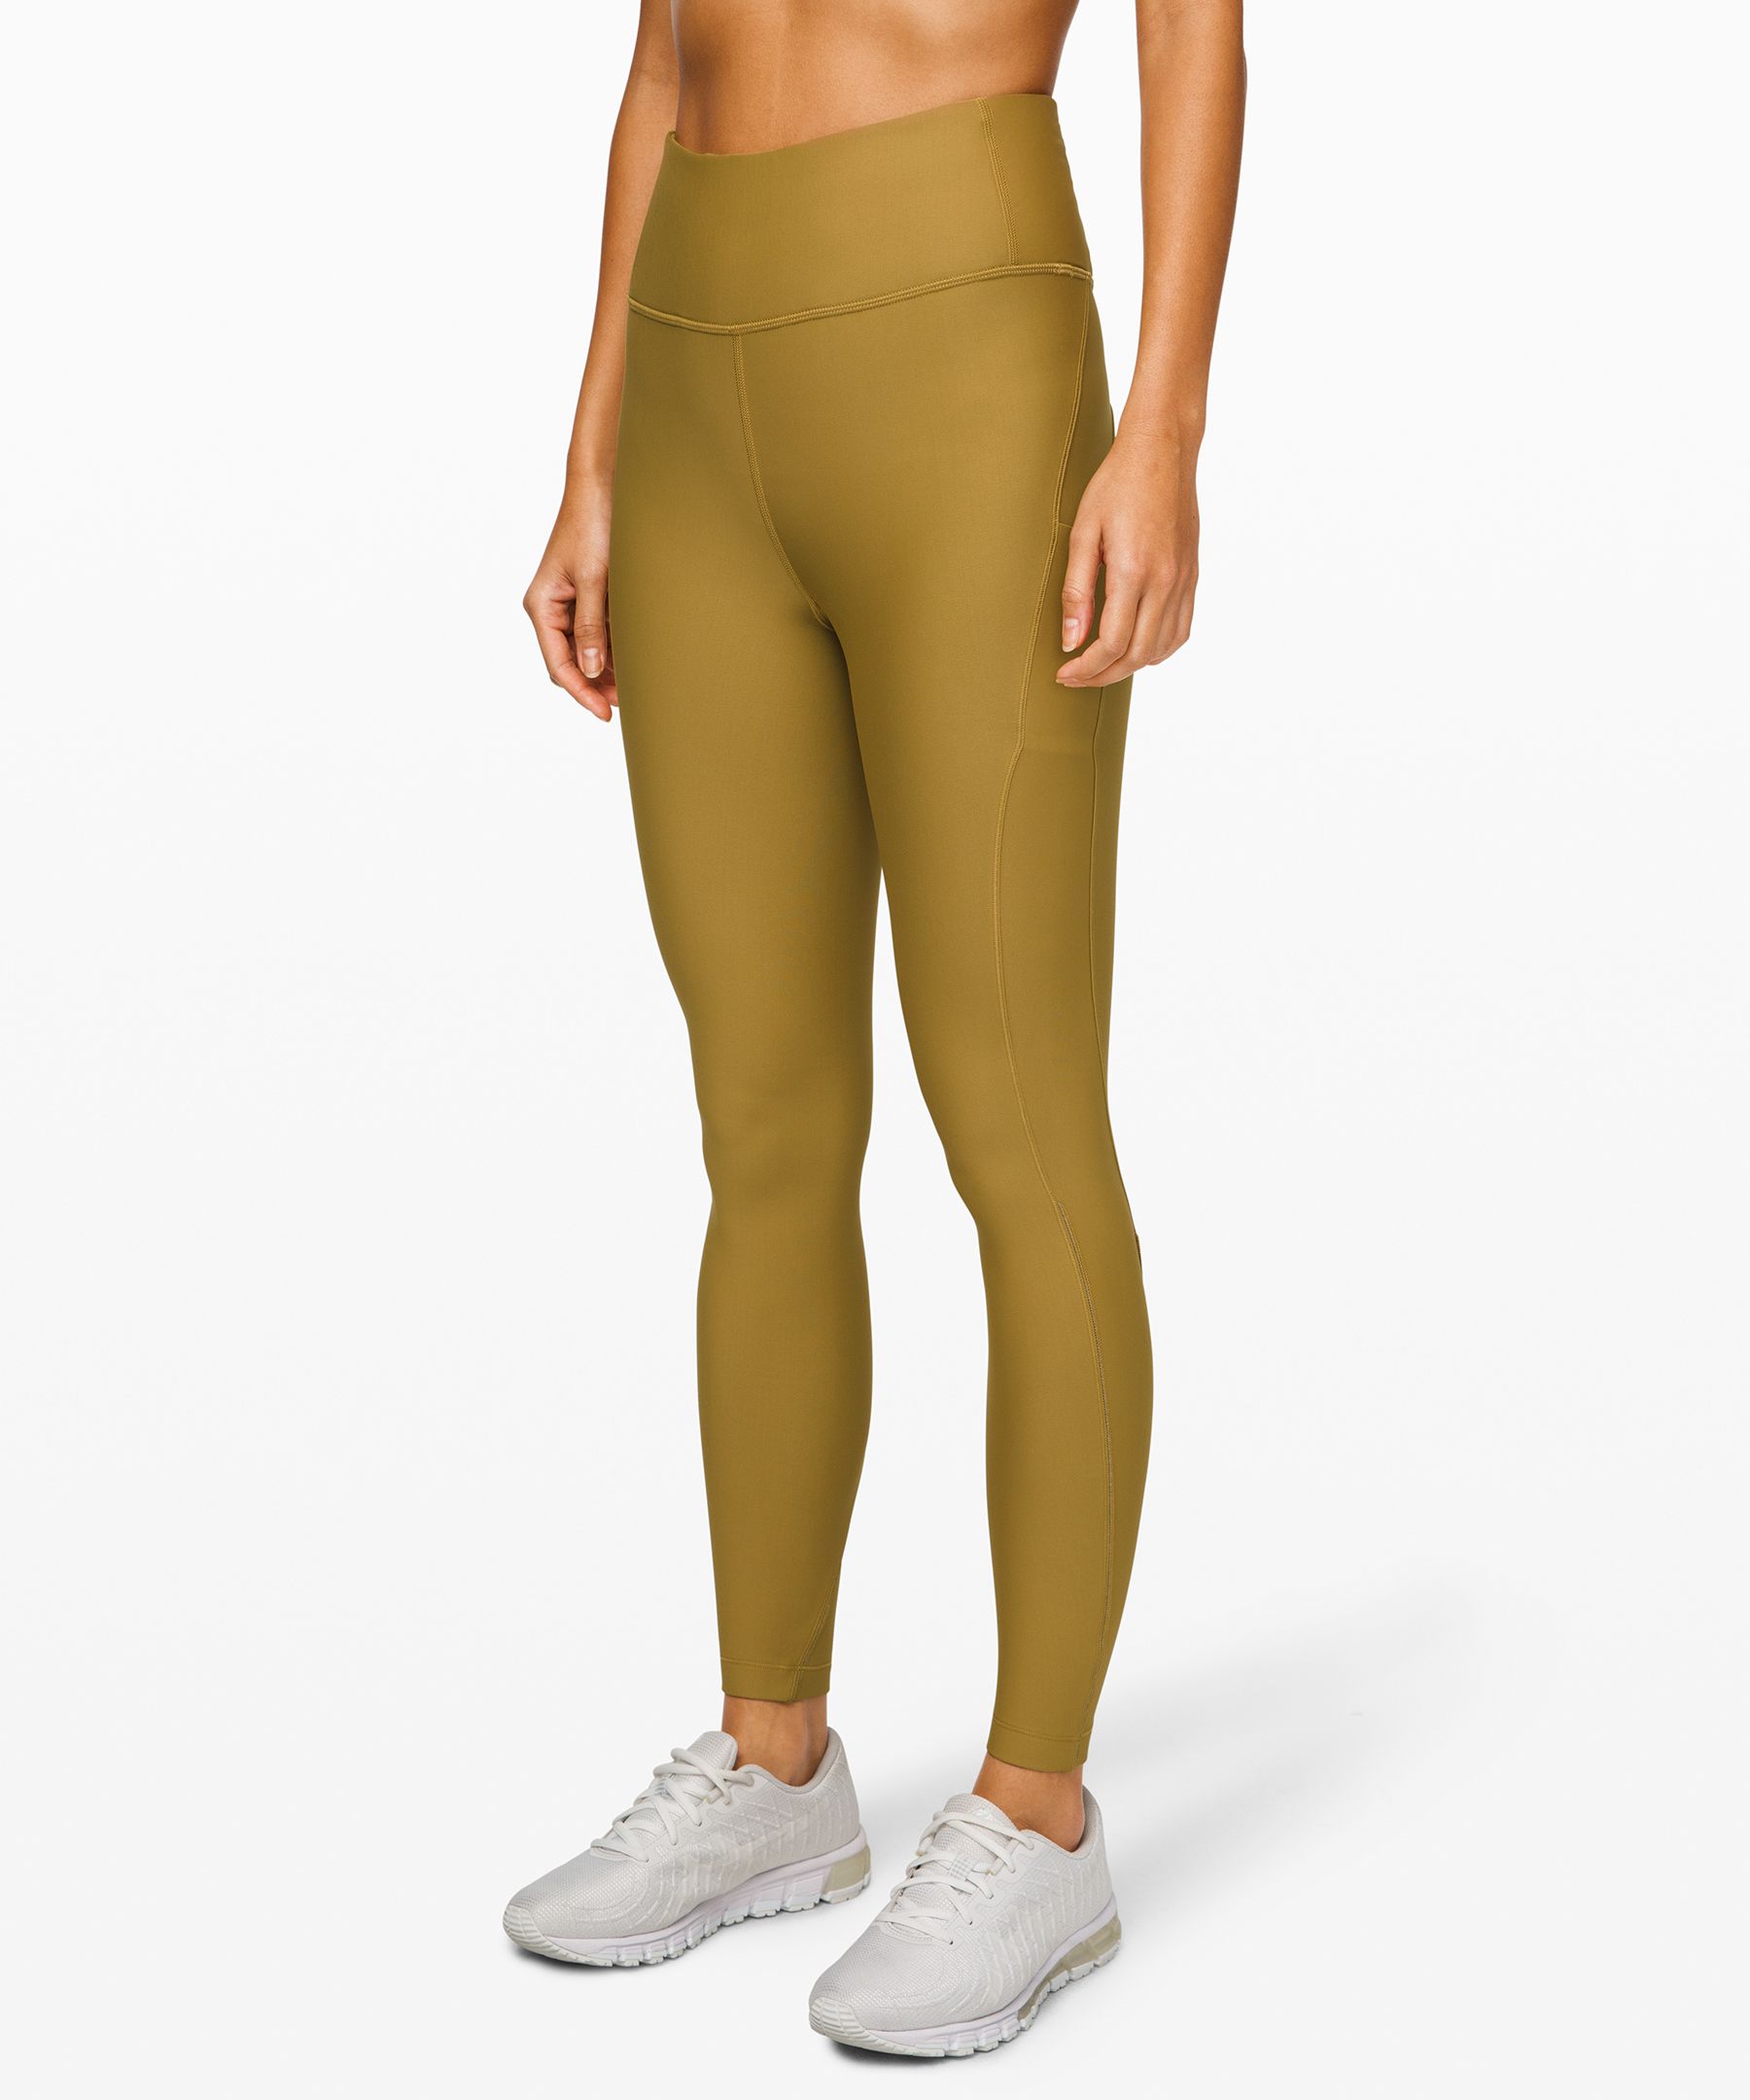 Lululemon Flurry Up Super High-rise Tight 28" In Yellow